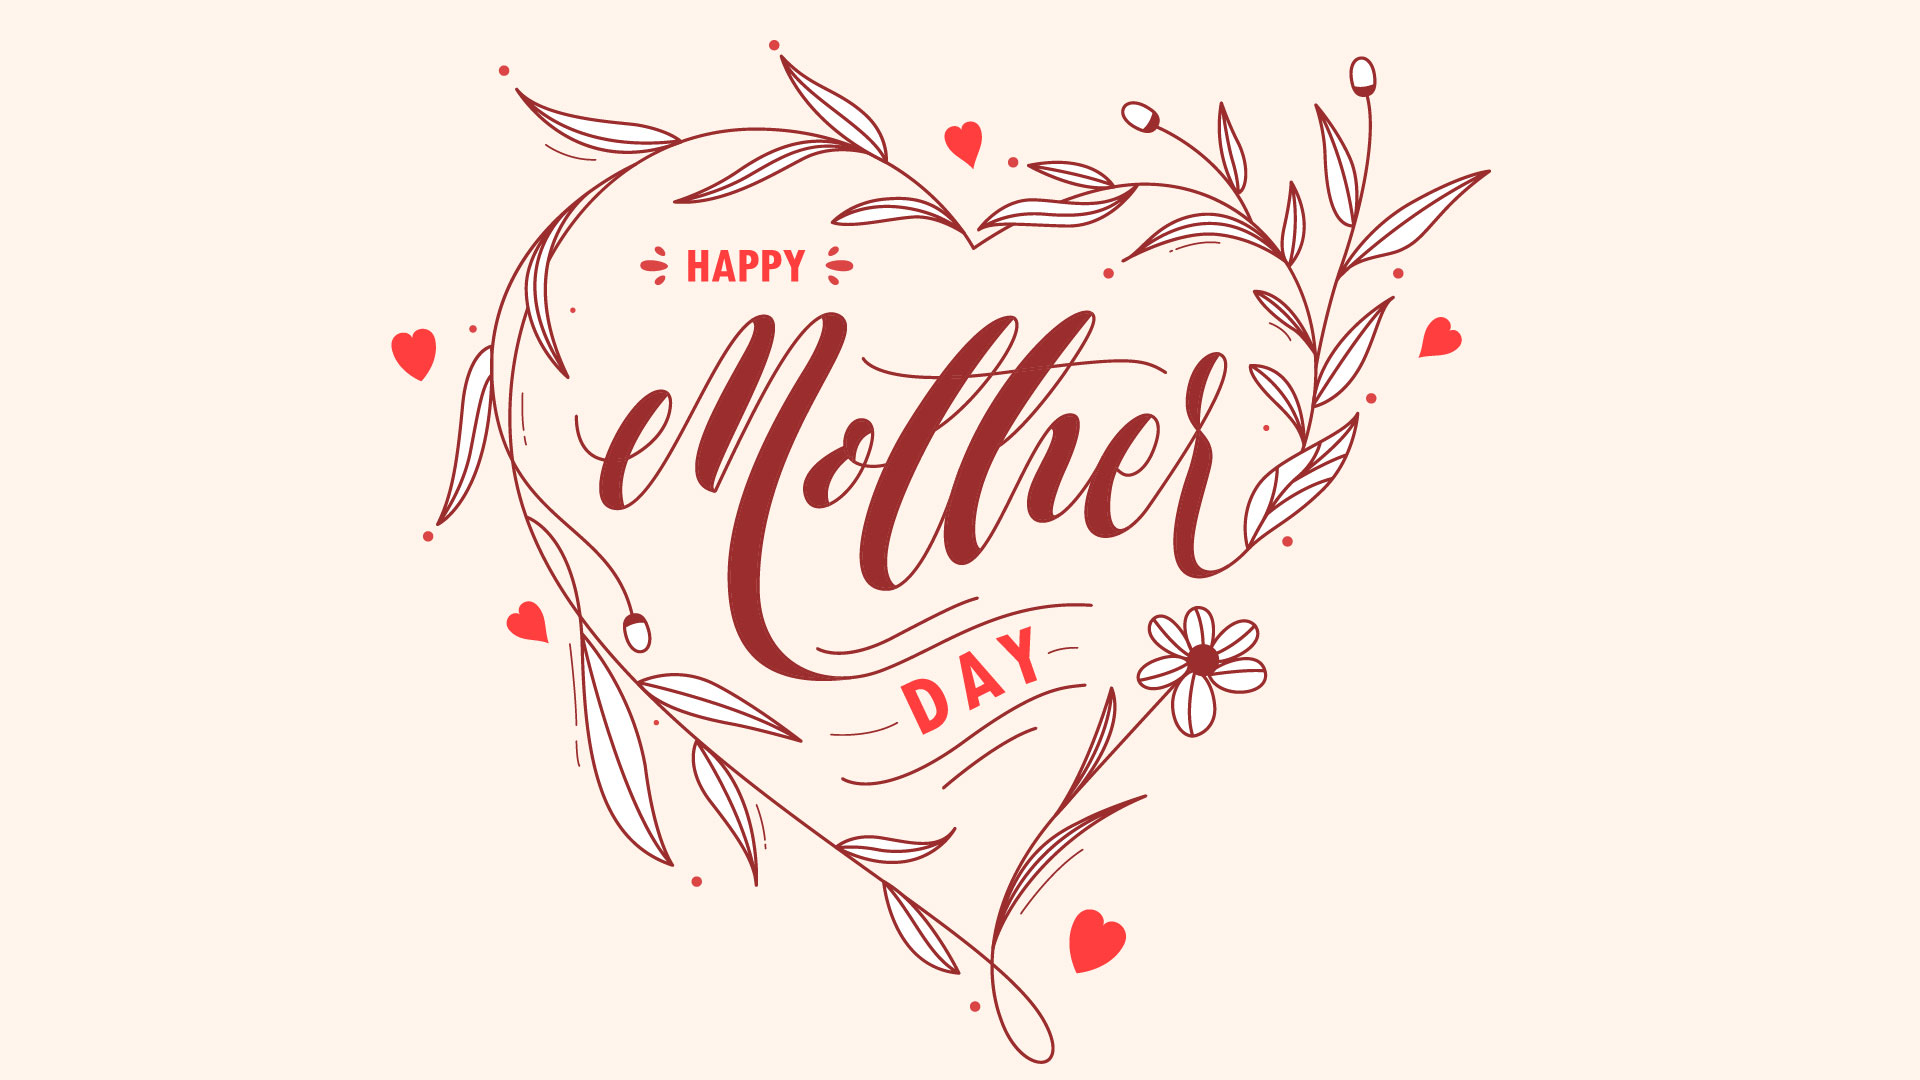 Tan background with a lined vein pattern creating a heart. Happy Mother's Day is written inside the heart in red and maroon lettering.